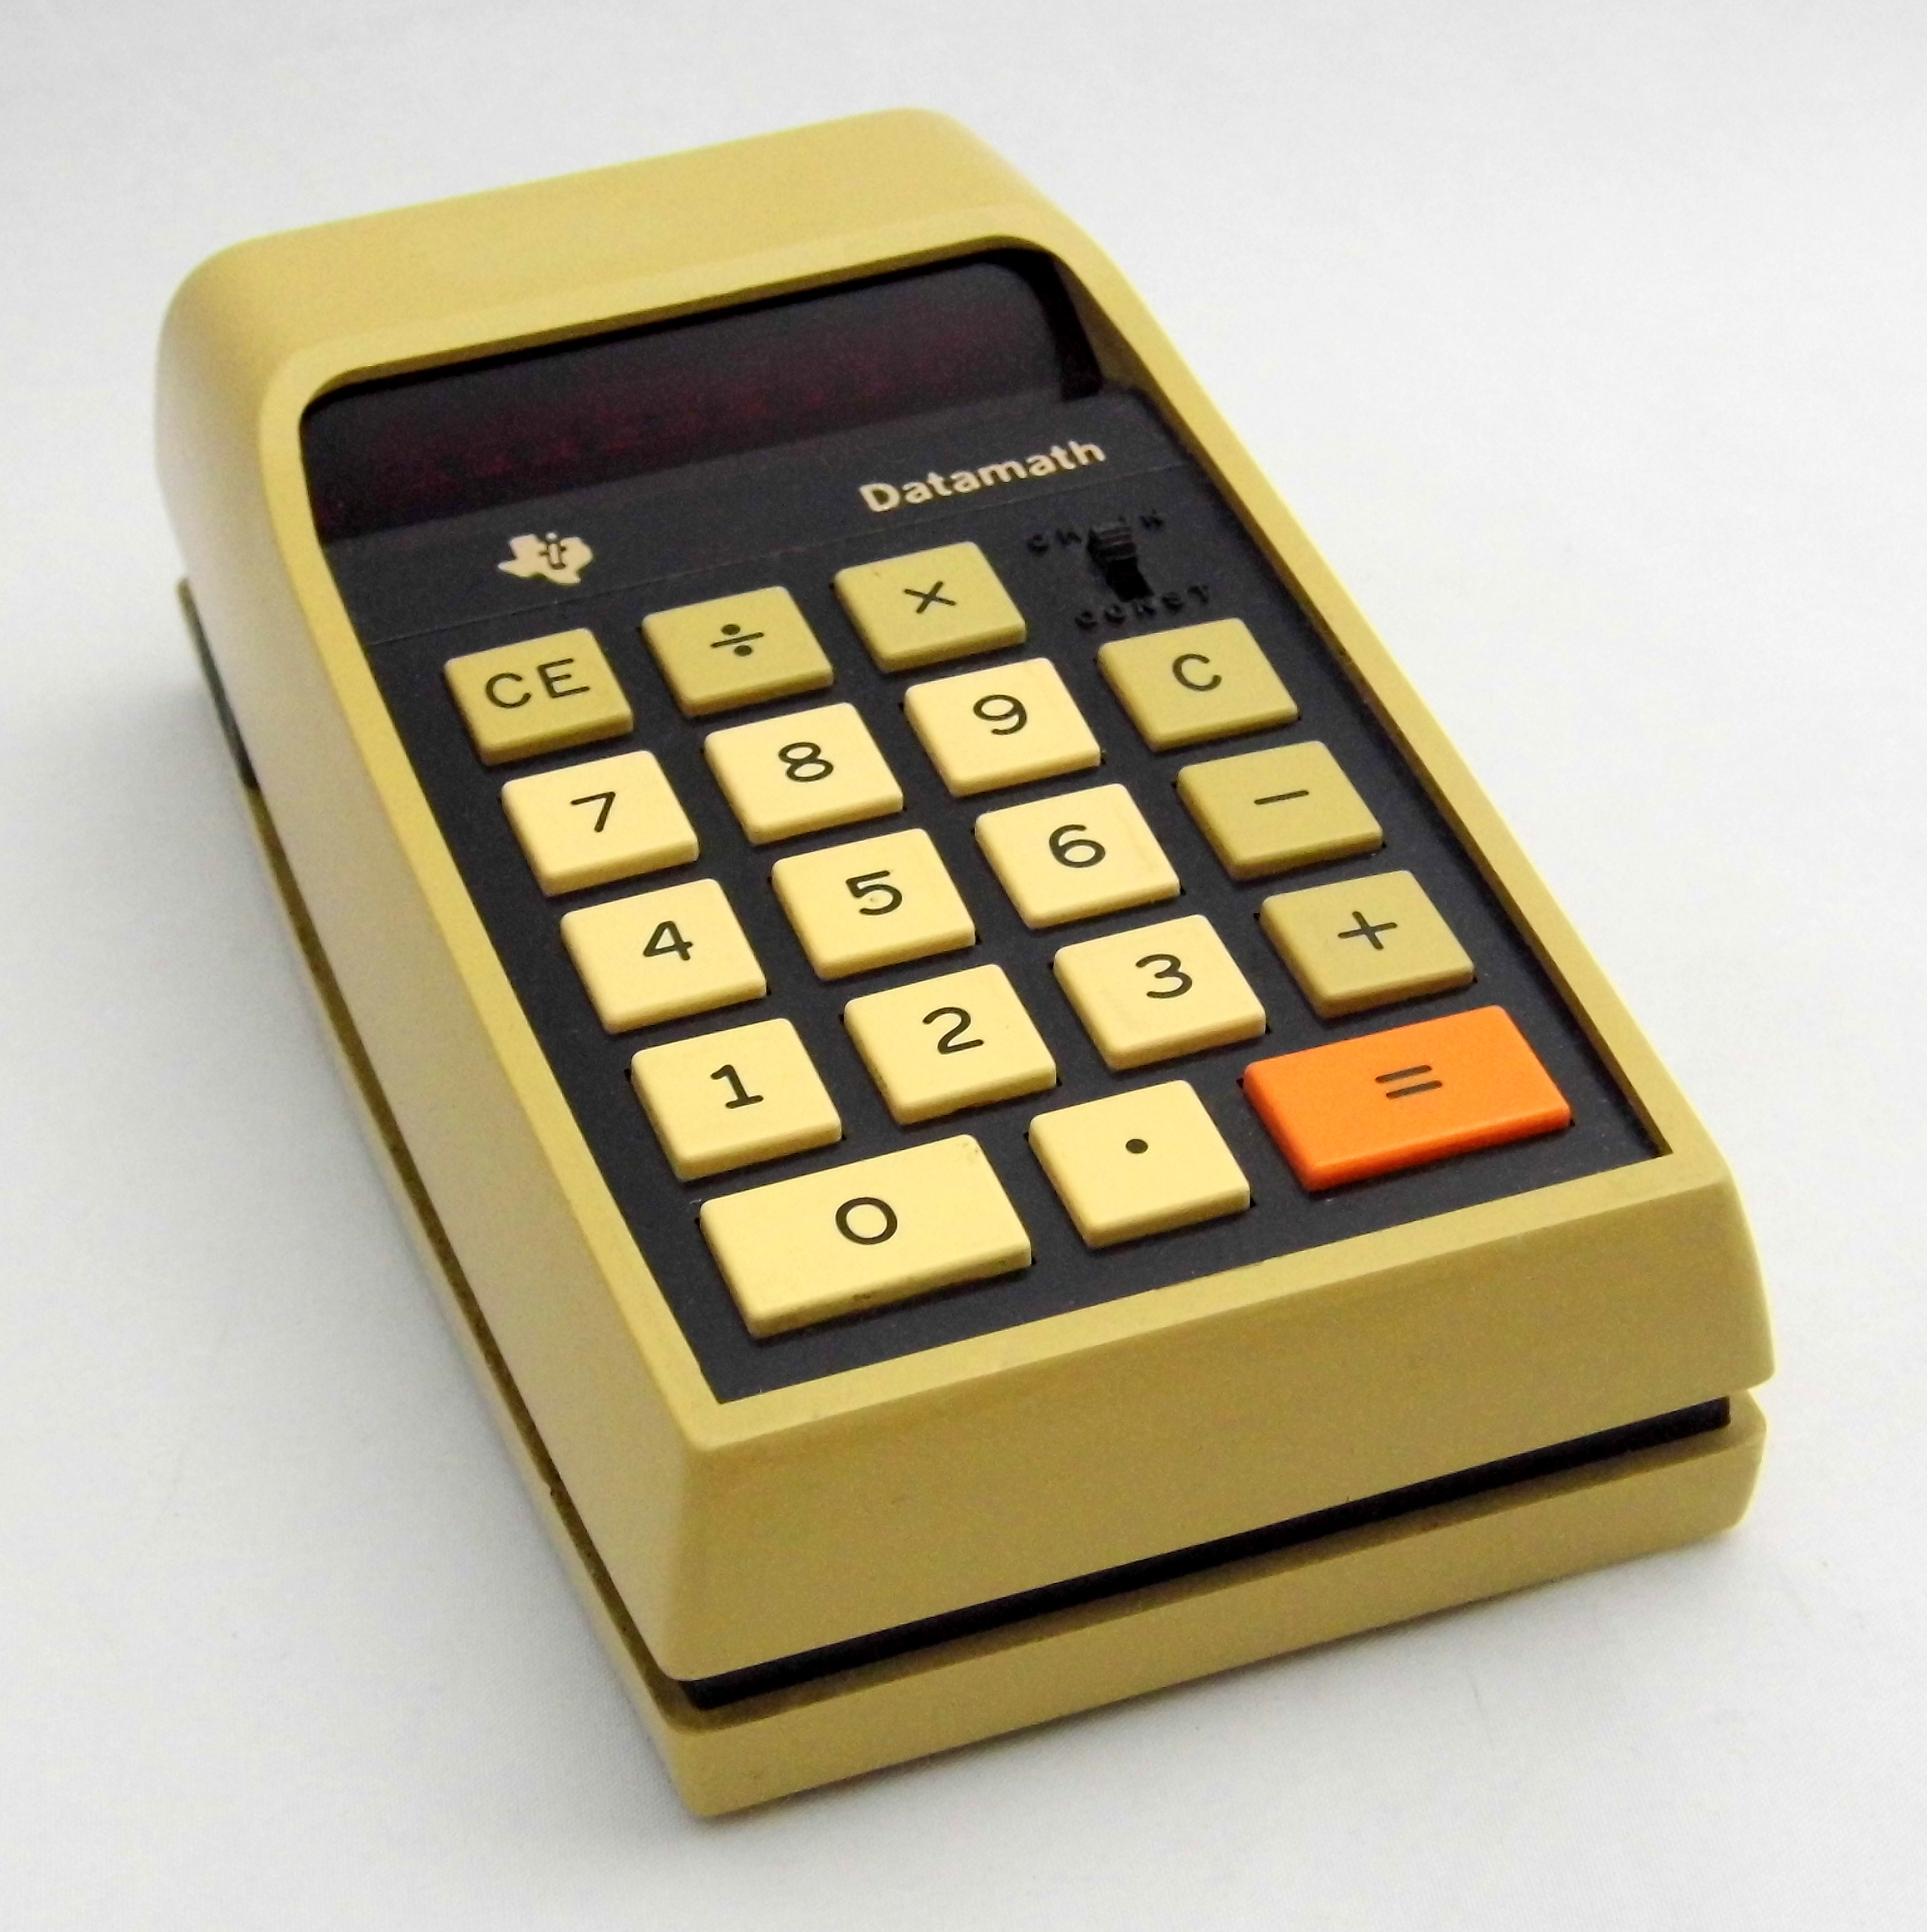 Amazing at the Time: Dad's First Calculator in 1973 - Connecting the Dots